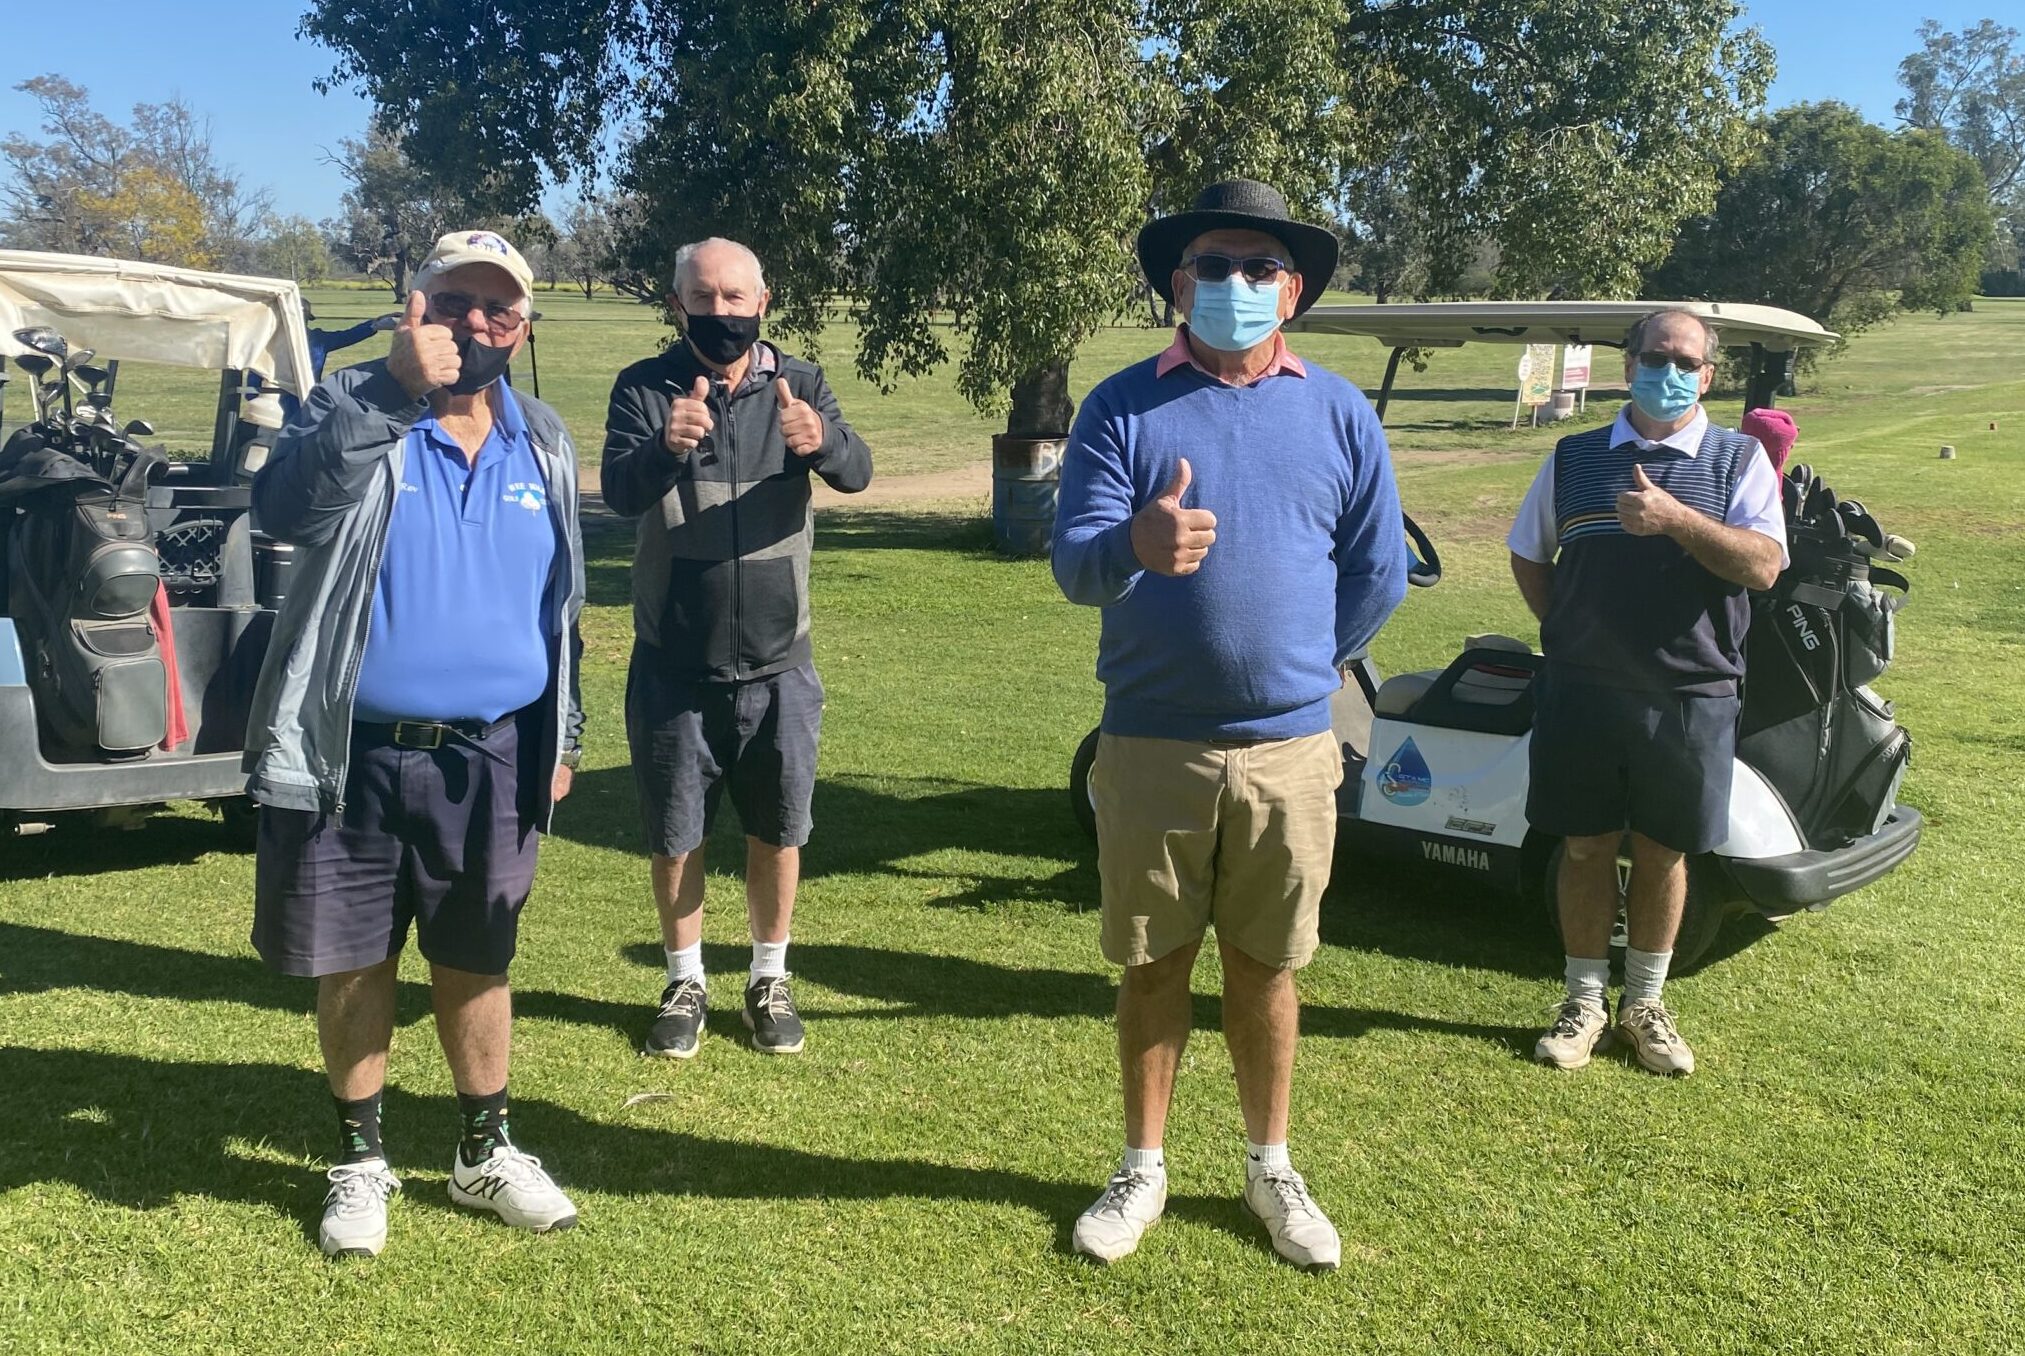 Wee Waa Golf Club hosts its 2021 Westpac Rescue Helicopter Service charity golf day